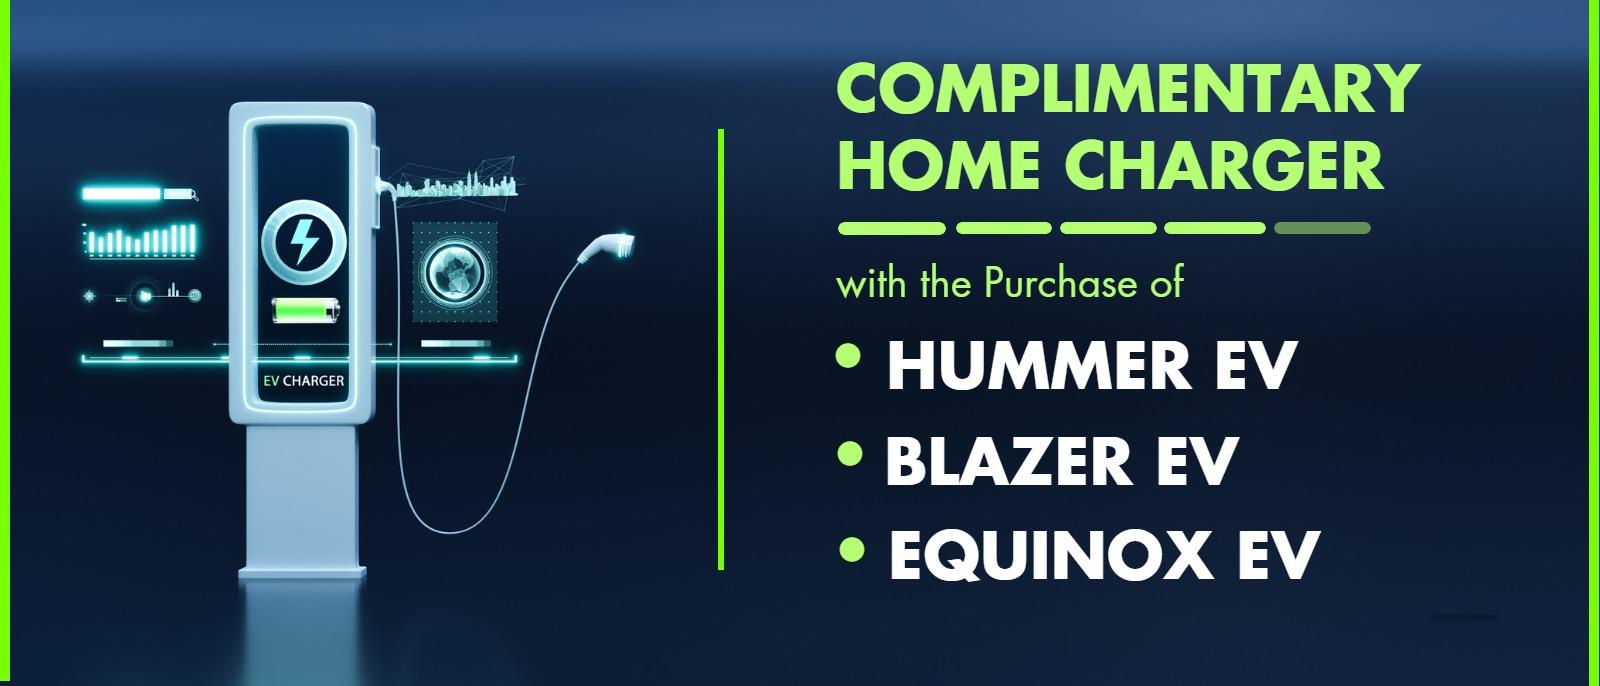 Complimentary Home Charger with the Purchase of Hummer EV, Blazer EV, and Equinox EV